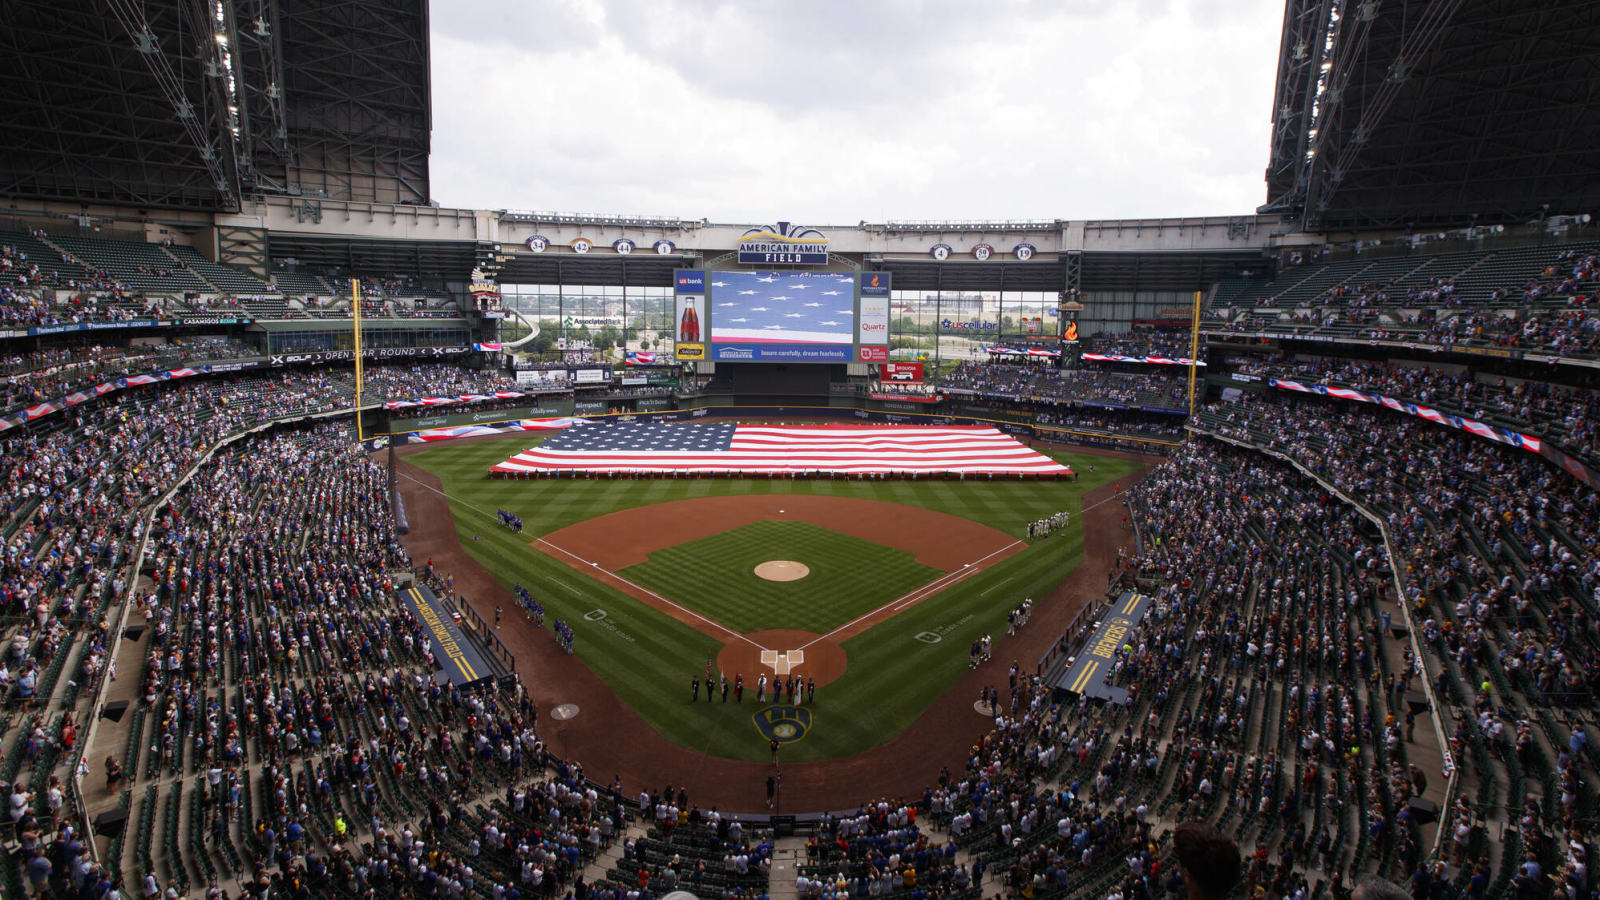 Report: Brewers Could Threaten Relocation Out of Wisconsin Amid